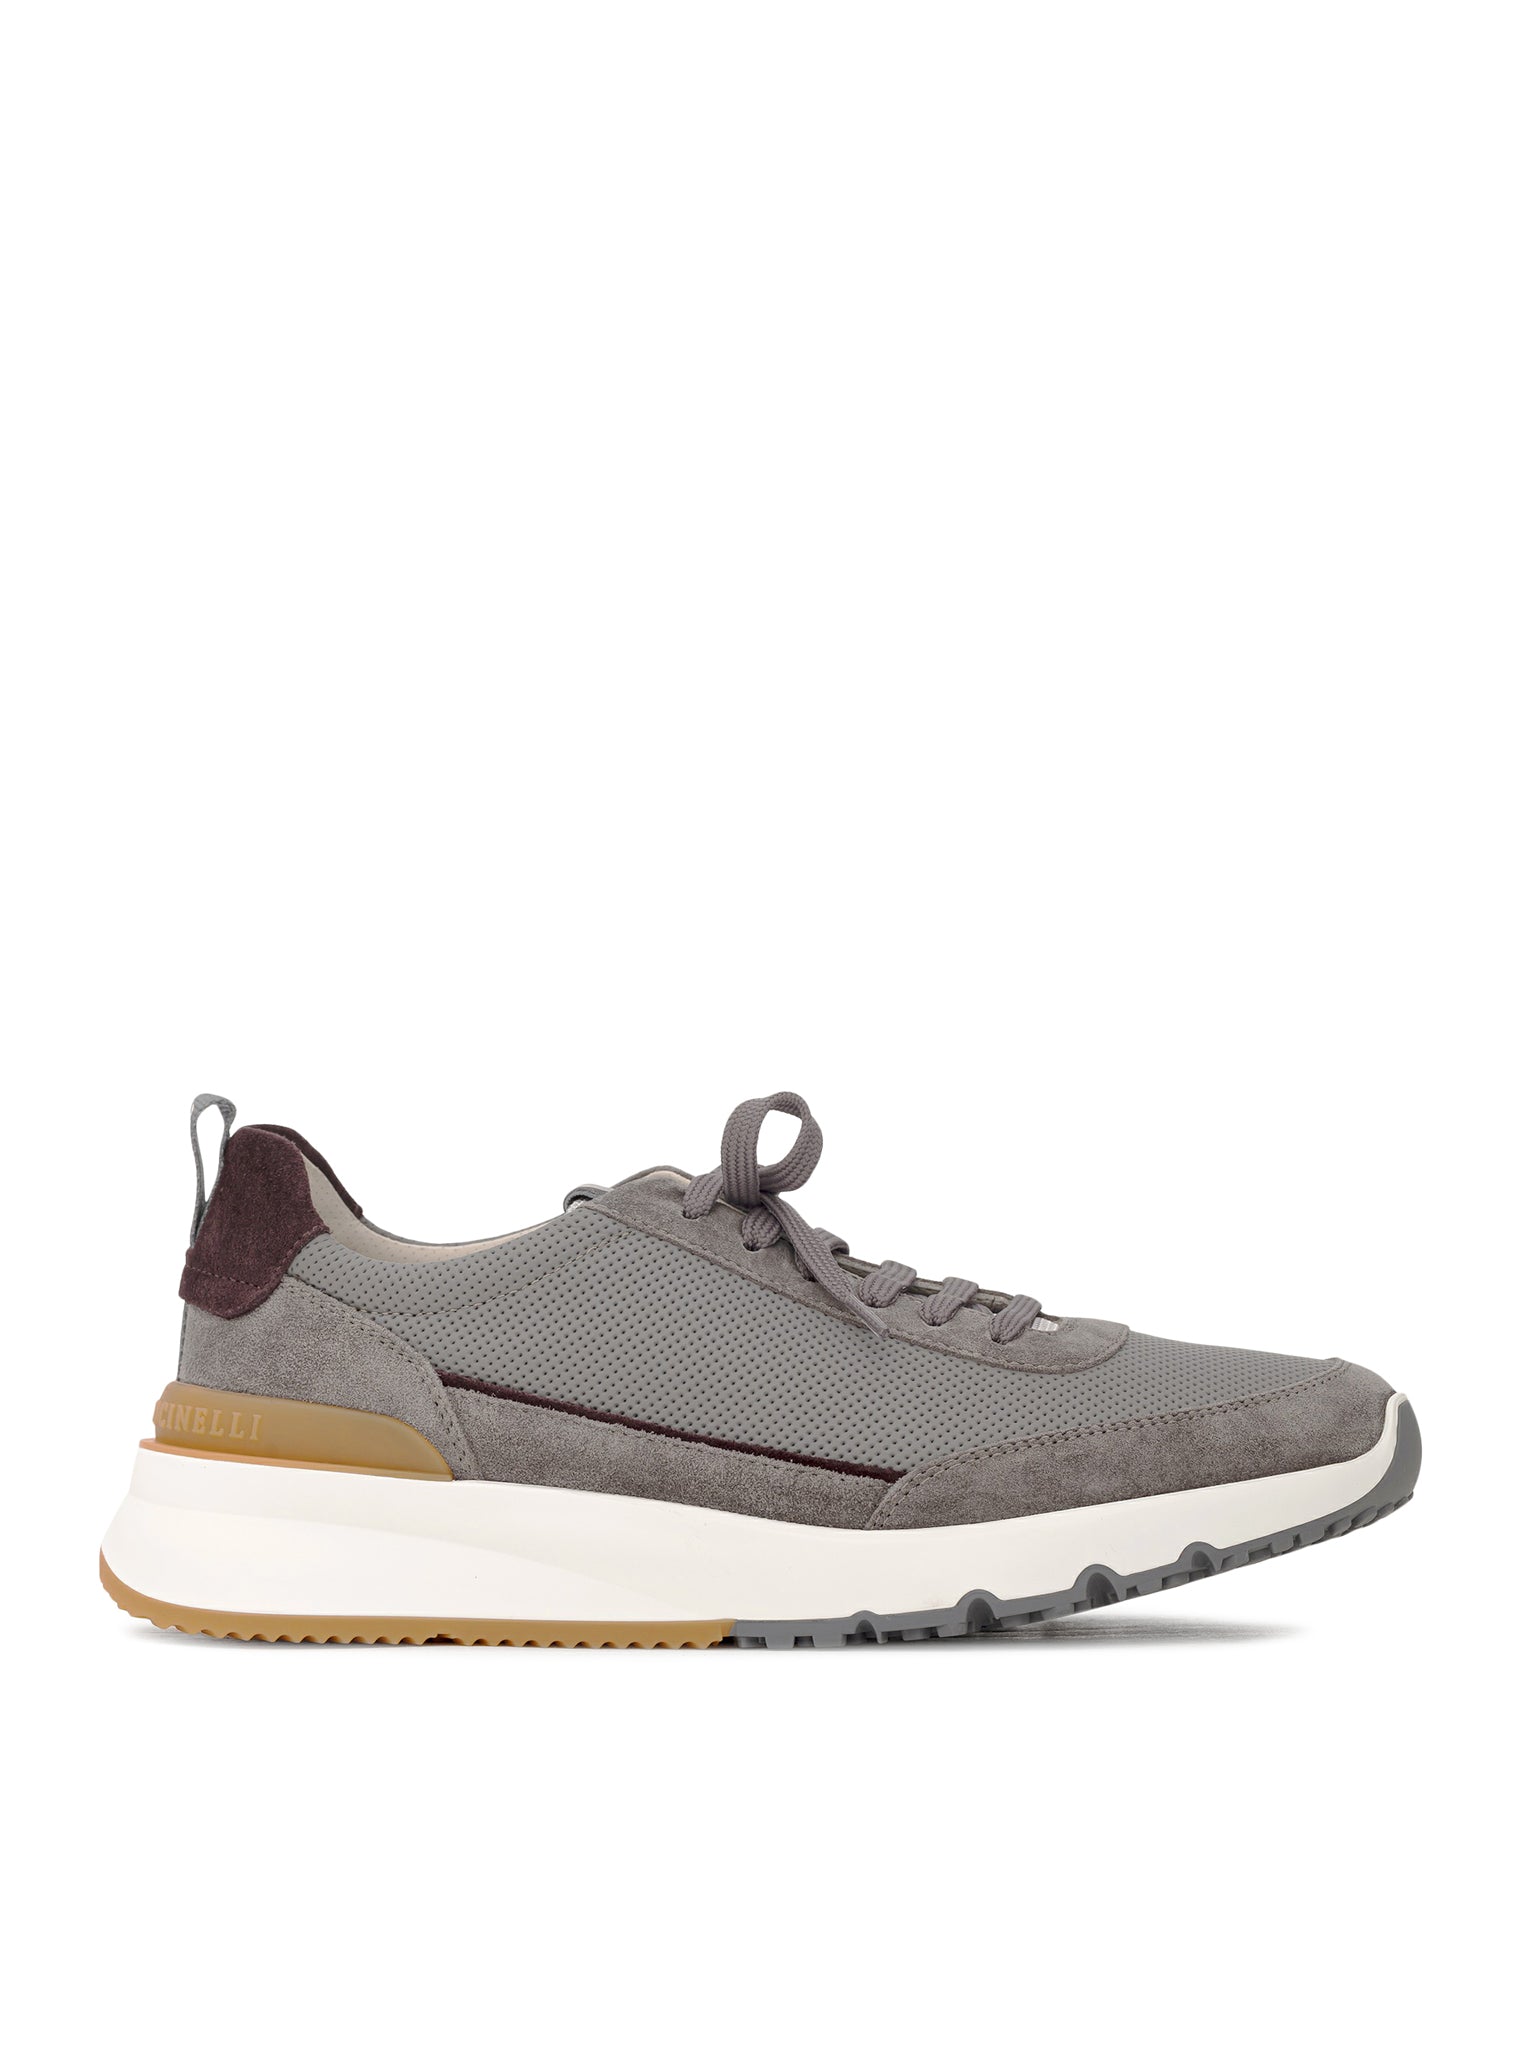 Sneakers in perforated leather and suede